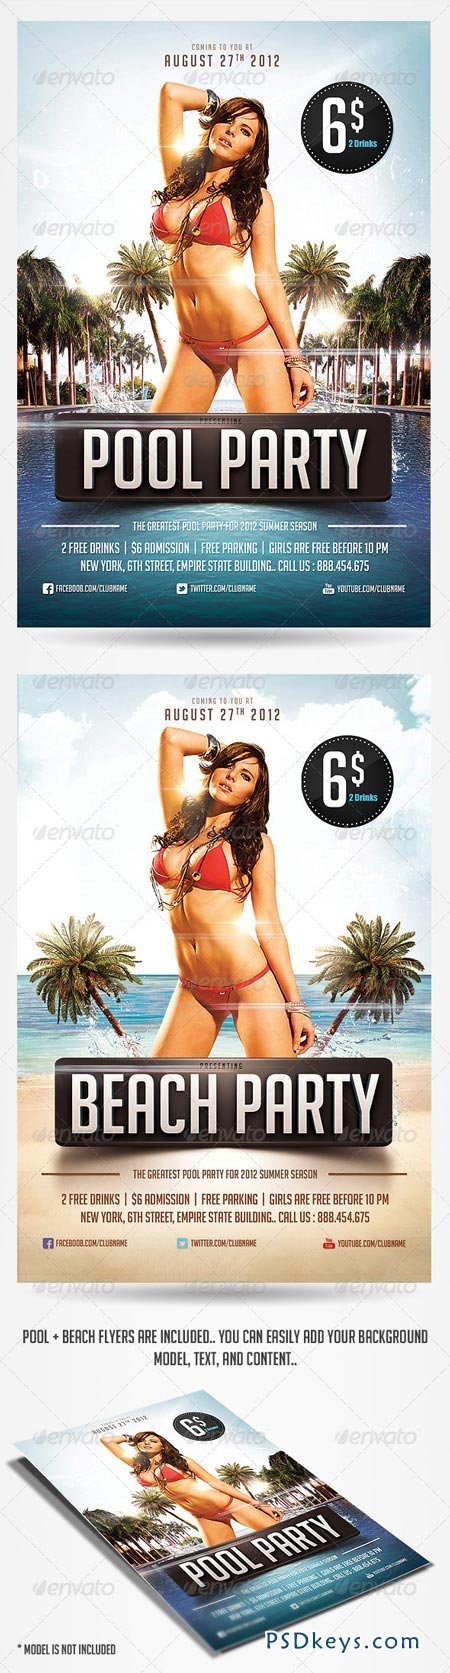 Pool & Beach party flyers 2480091